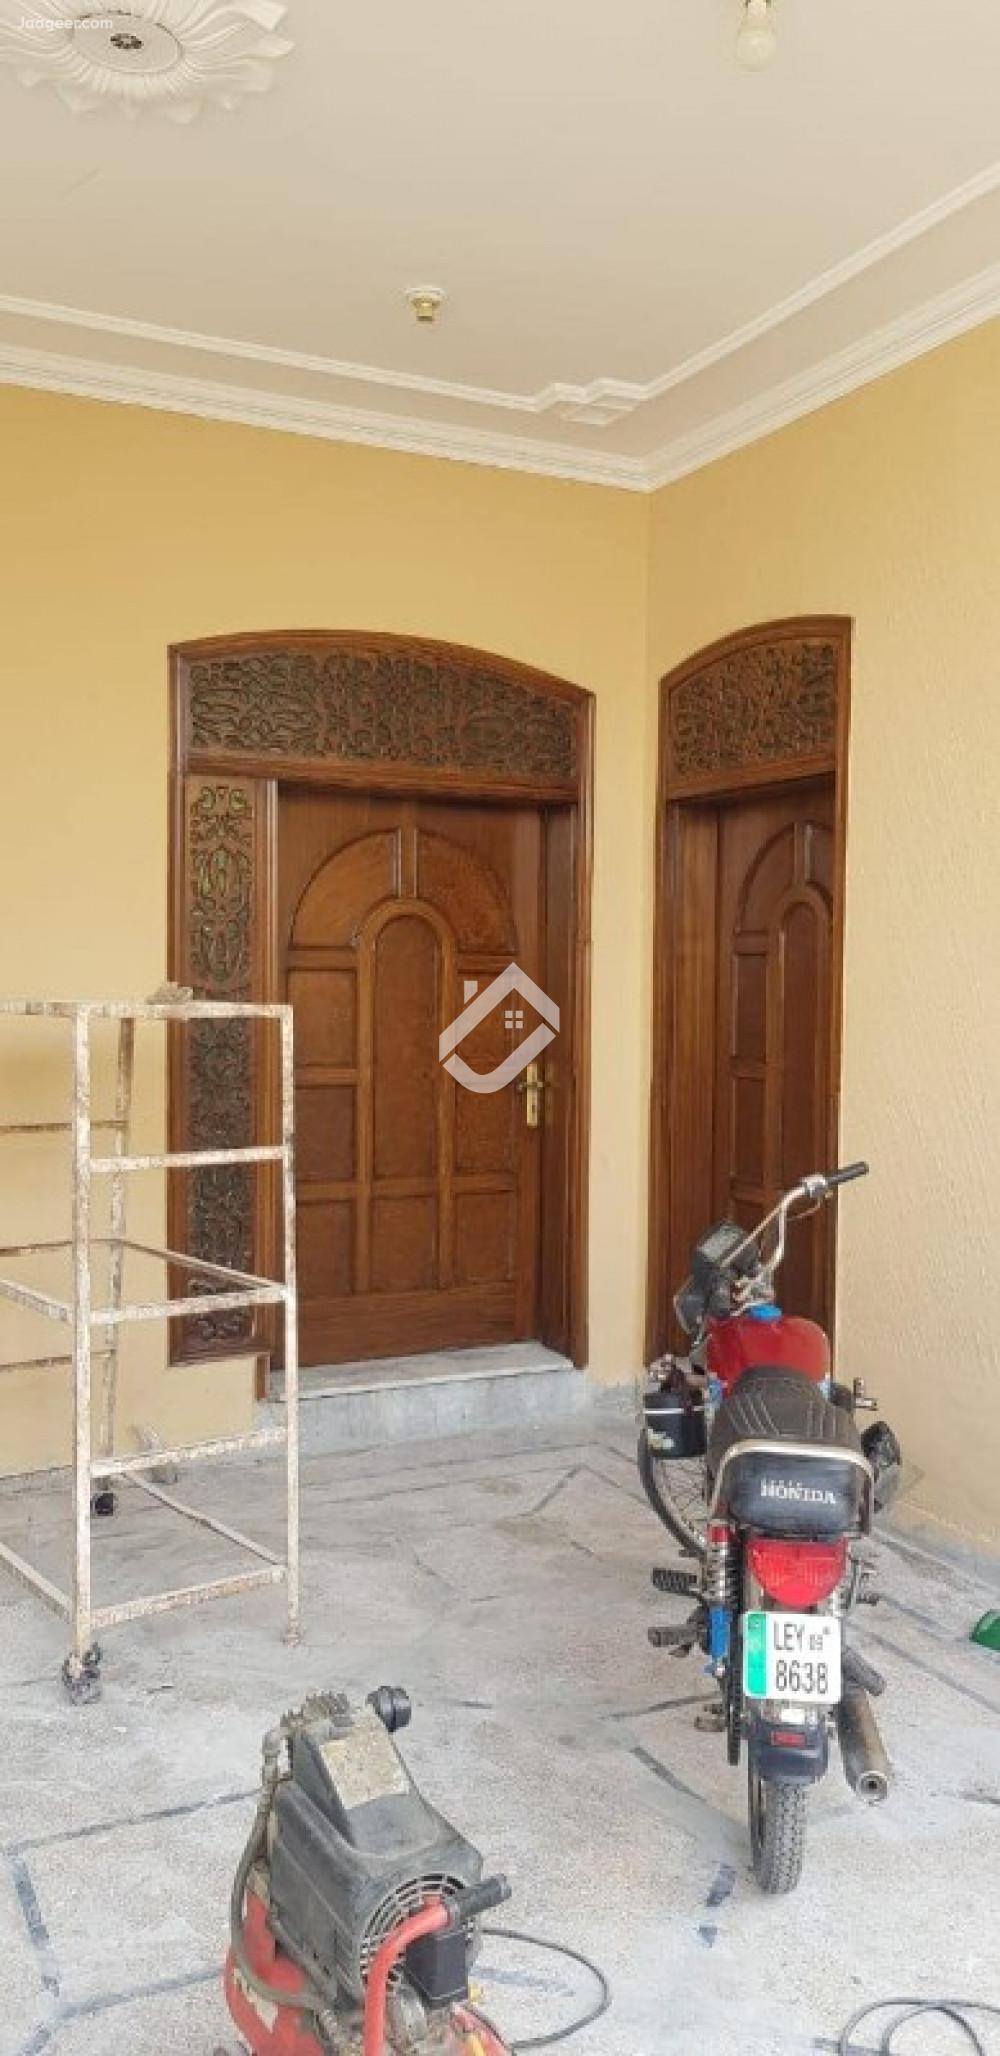 10 Marla Double Storey House For Sale In Wapda Town Cooperative Housing Society in Wapda Town, Lahore